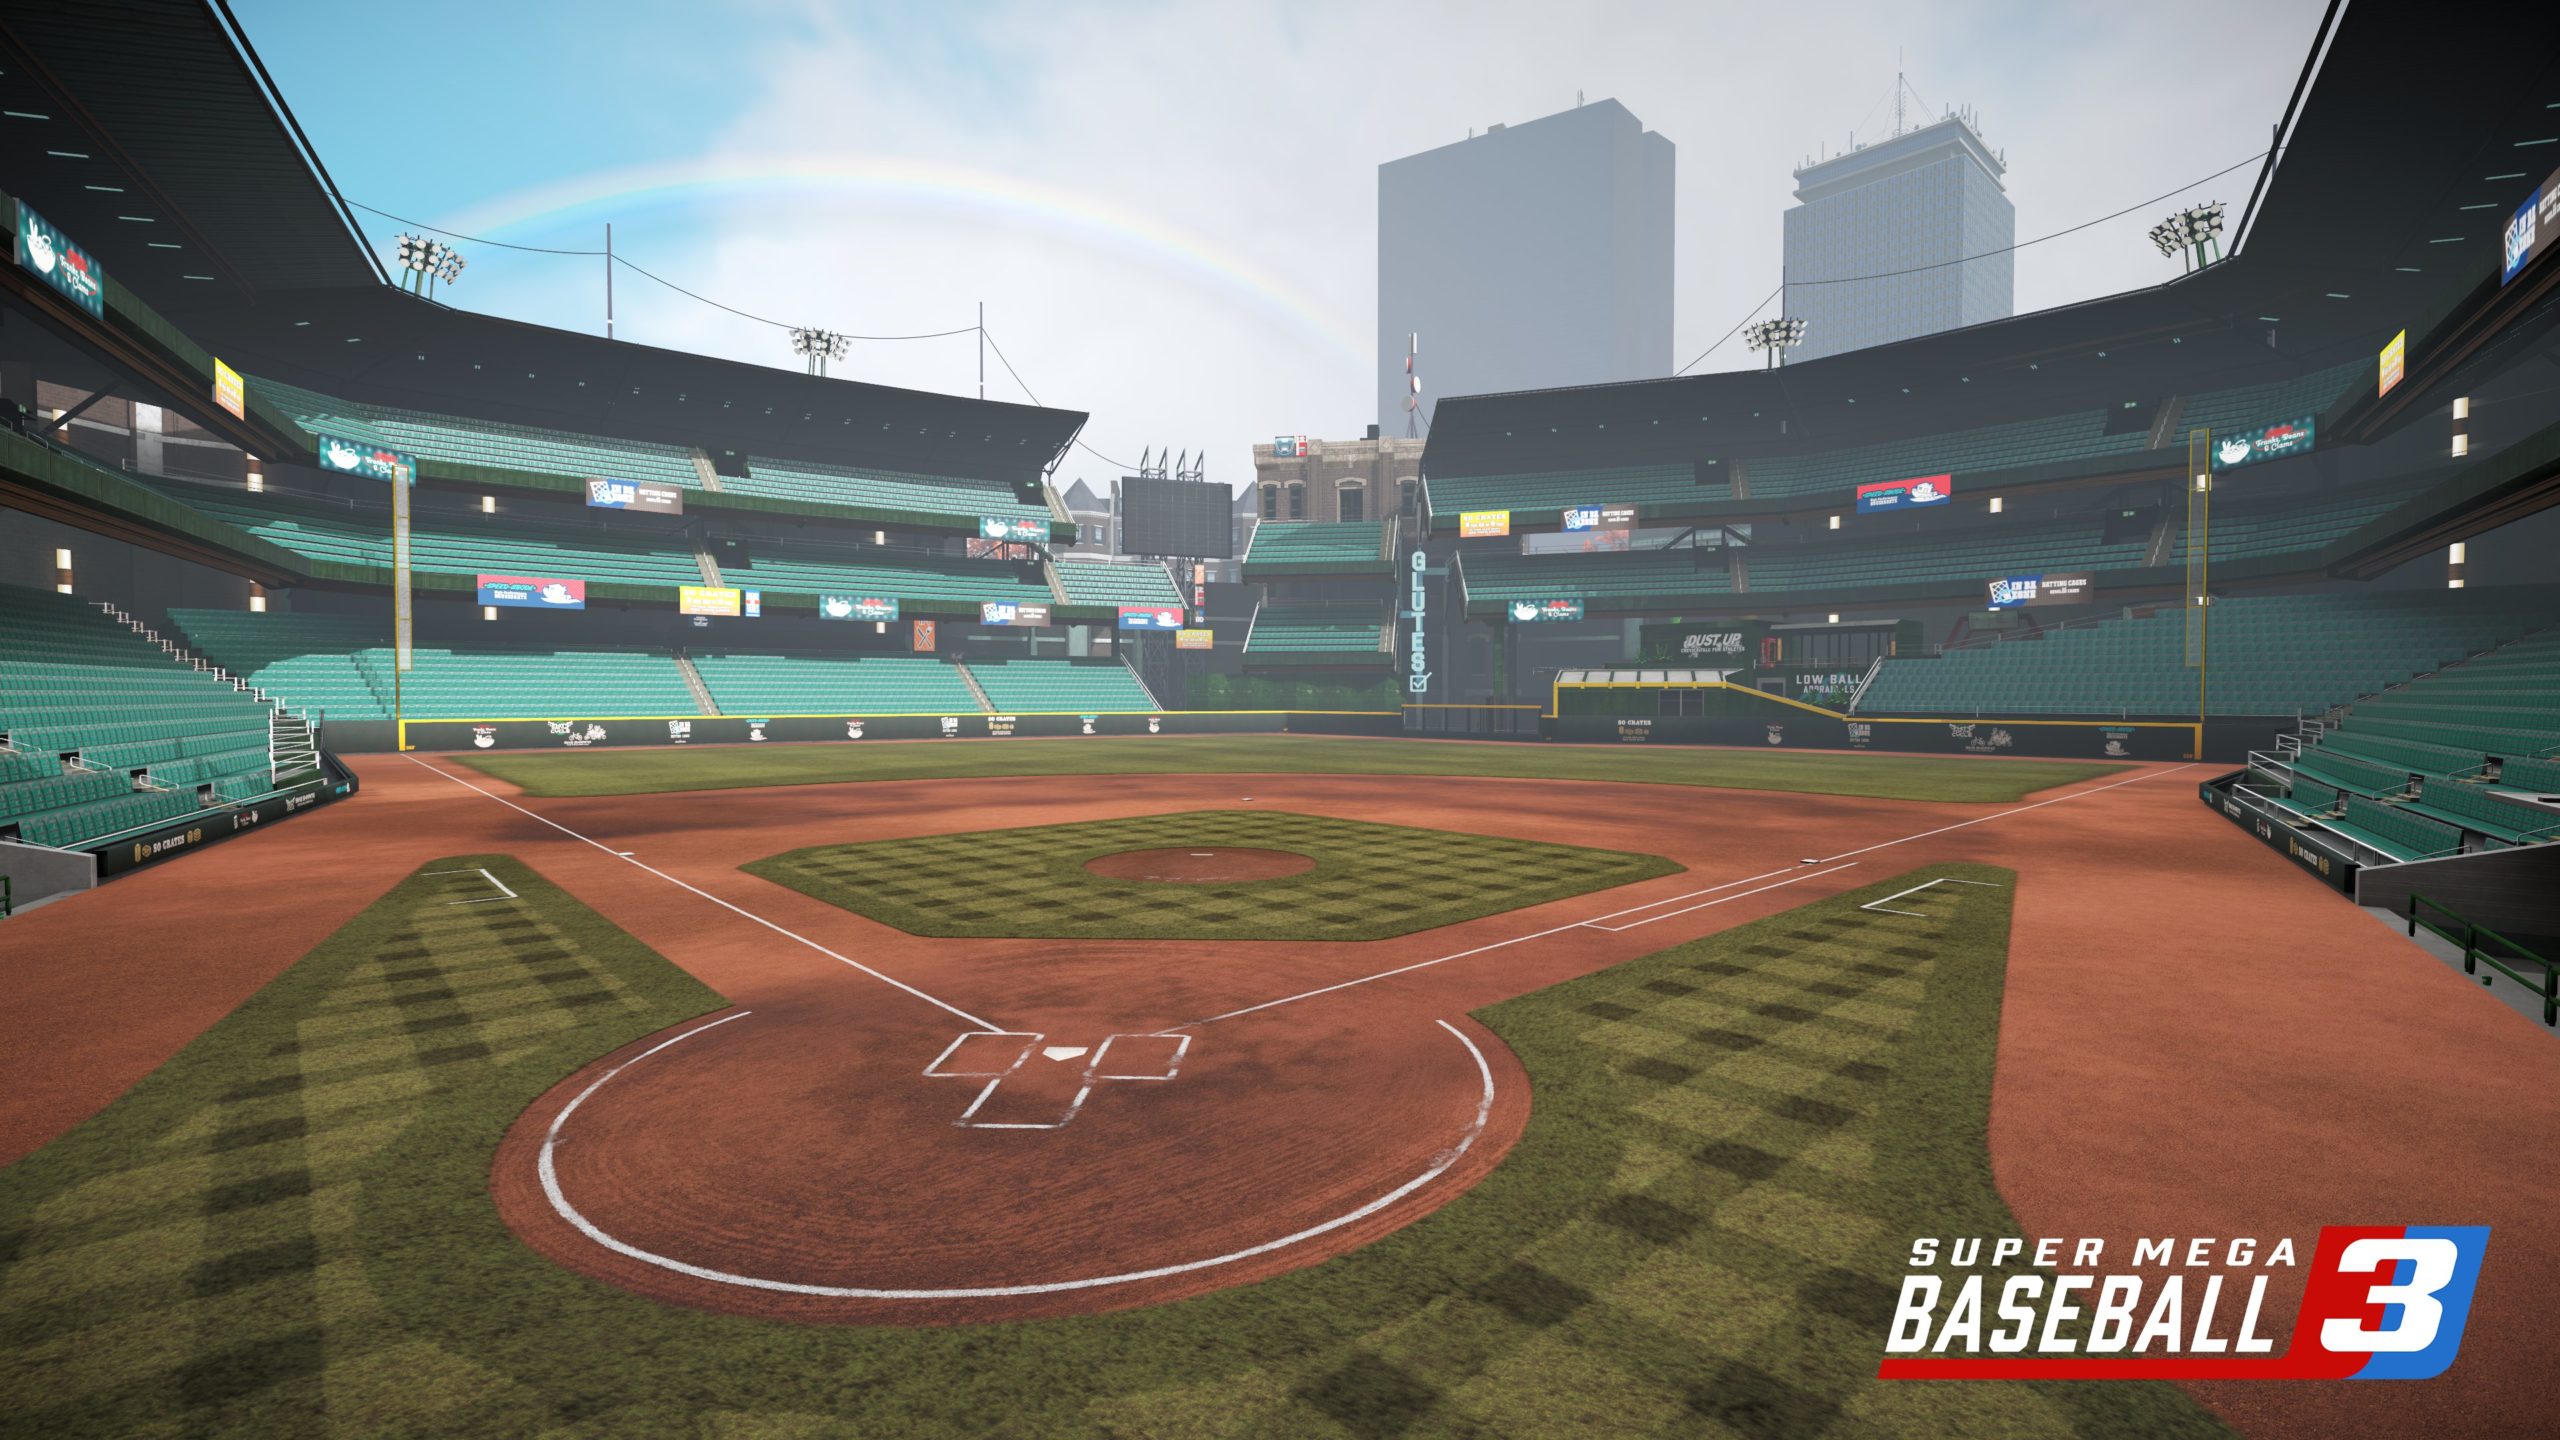 Super Mega Baseball 3 Online Leagues and Watch Mode Scheduled to Arrive on September 29